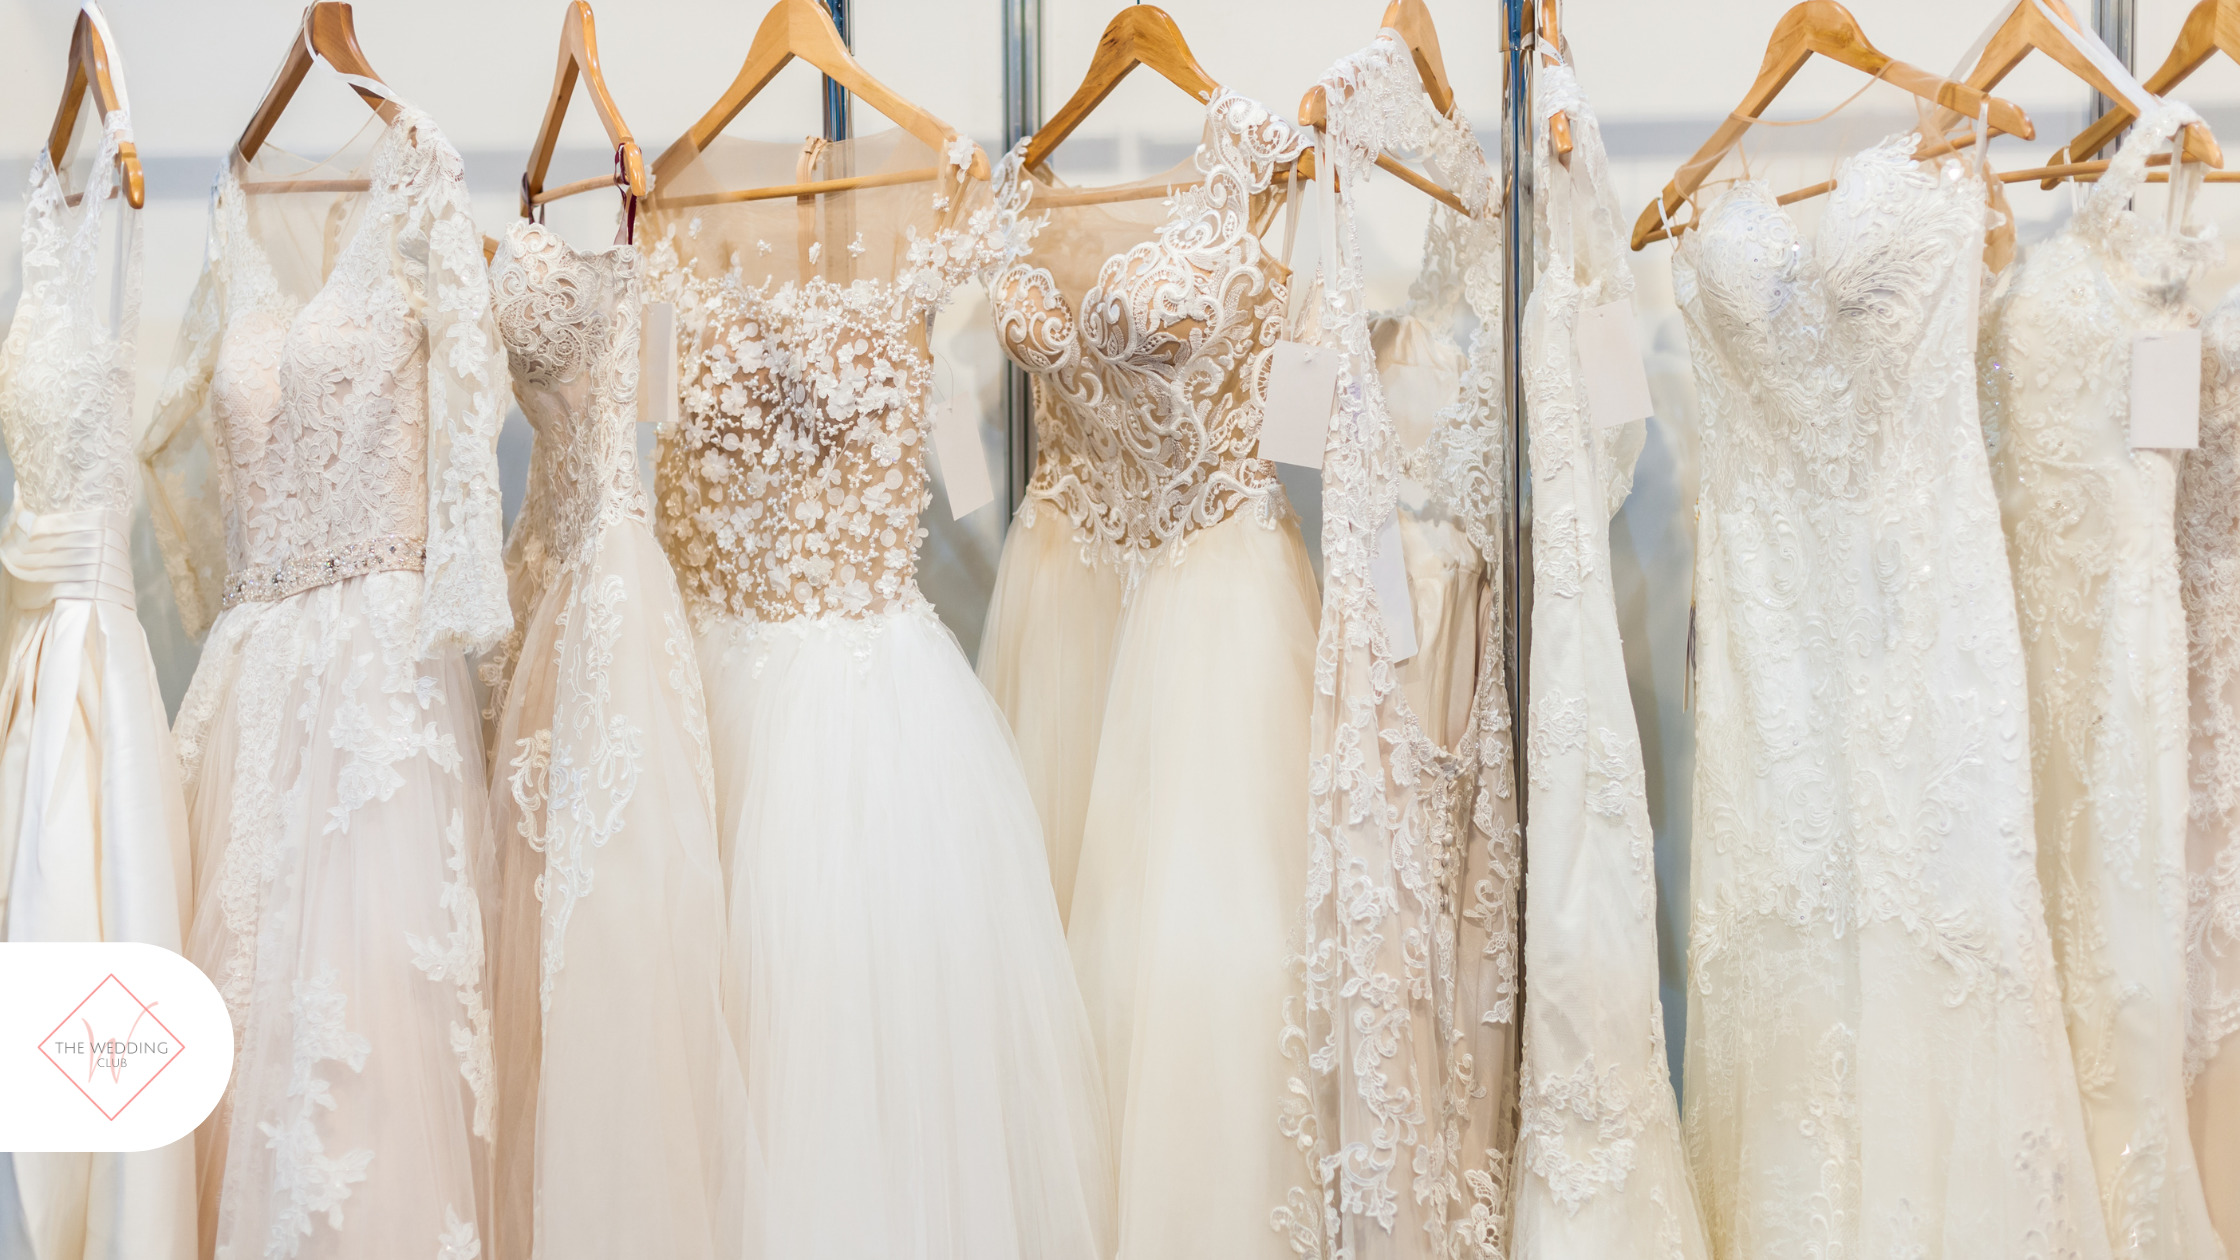 How to shop for your wedding dress